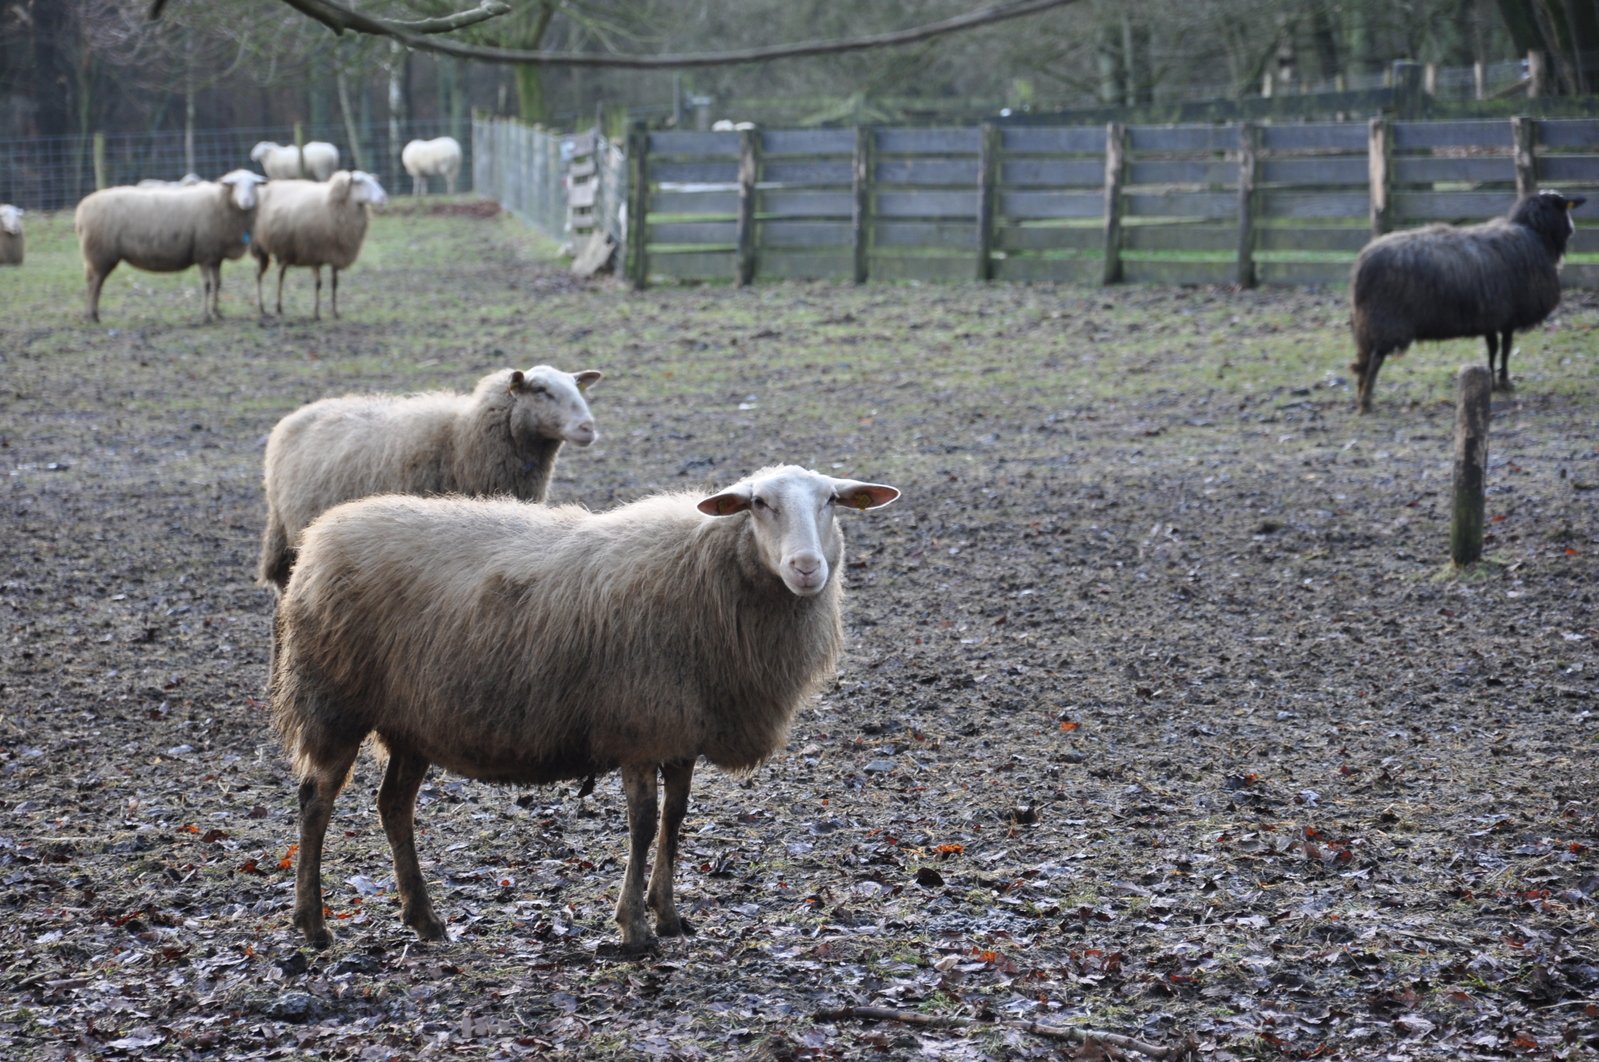 the sheep are standing around in a fenced in pasture